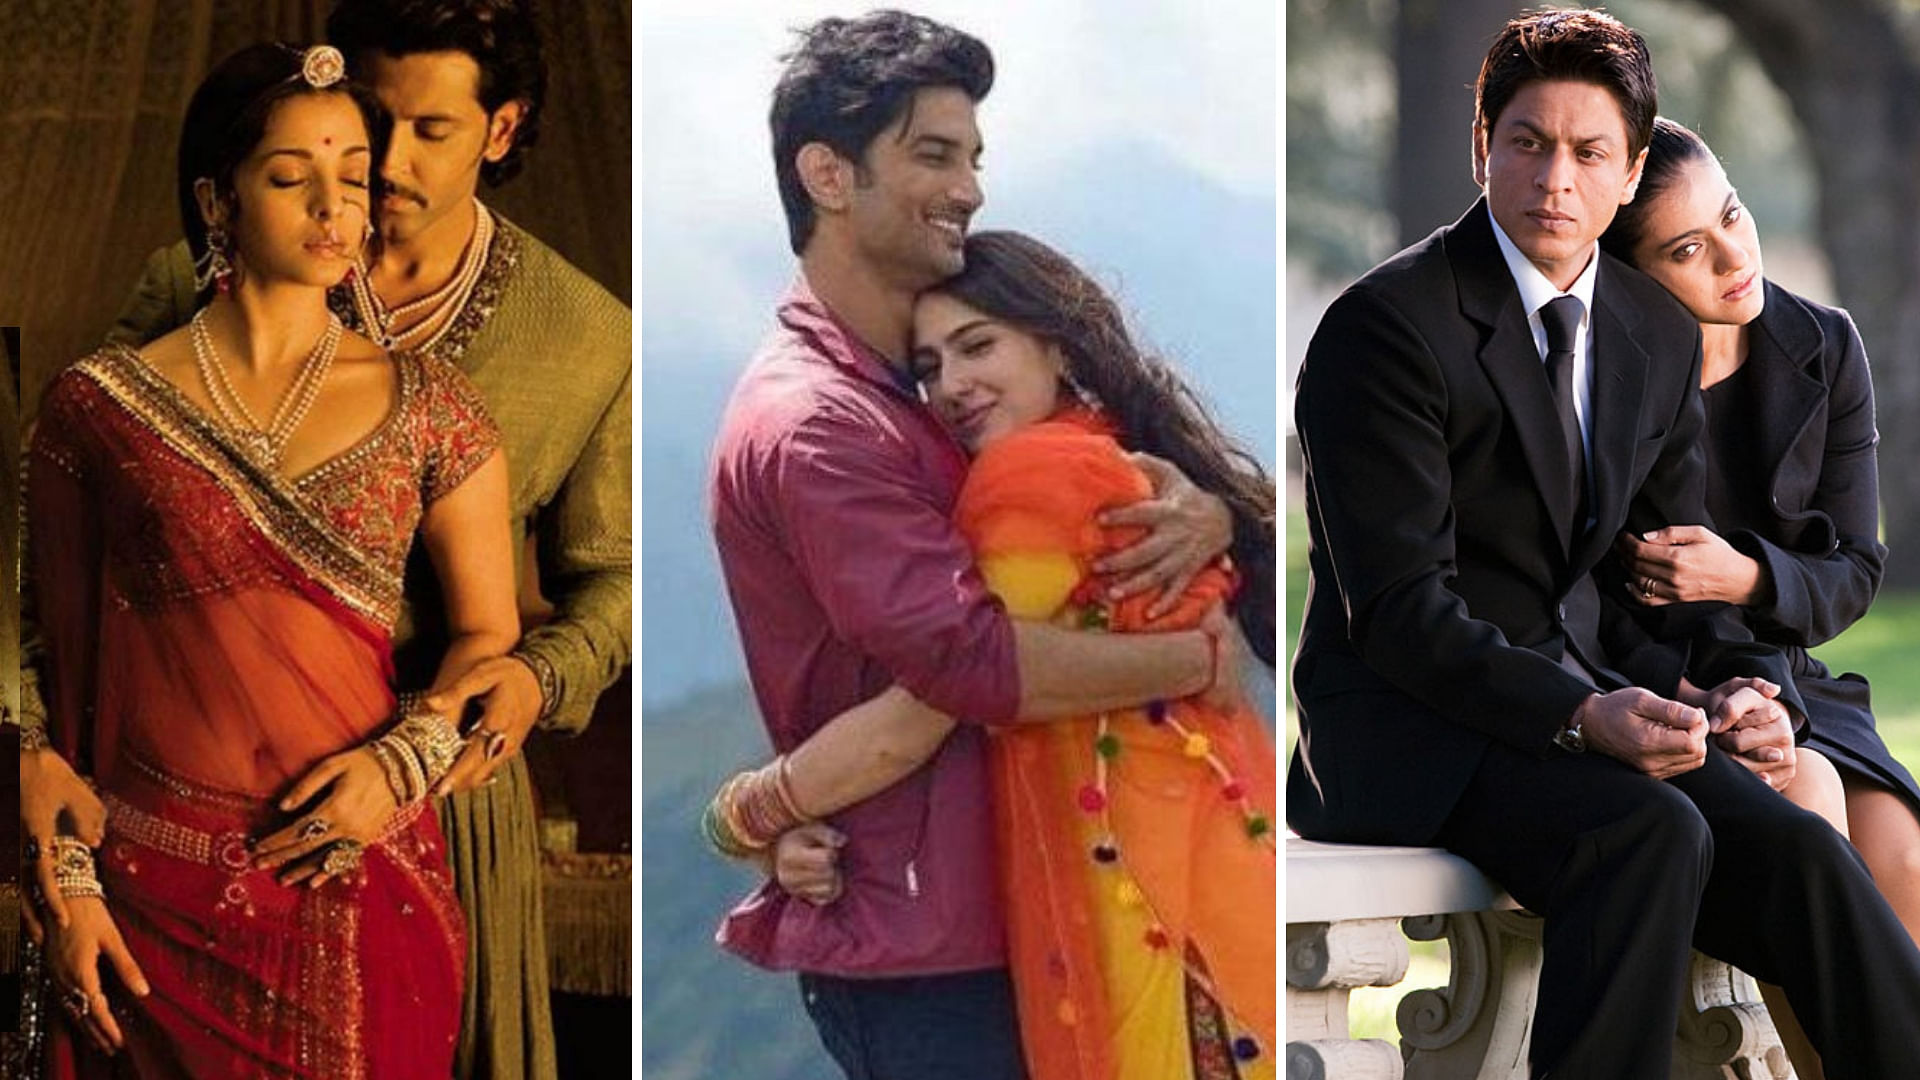 Kedarnath Is the Latest in Bollywoods Tryst With Hindu-Muslim Romances